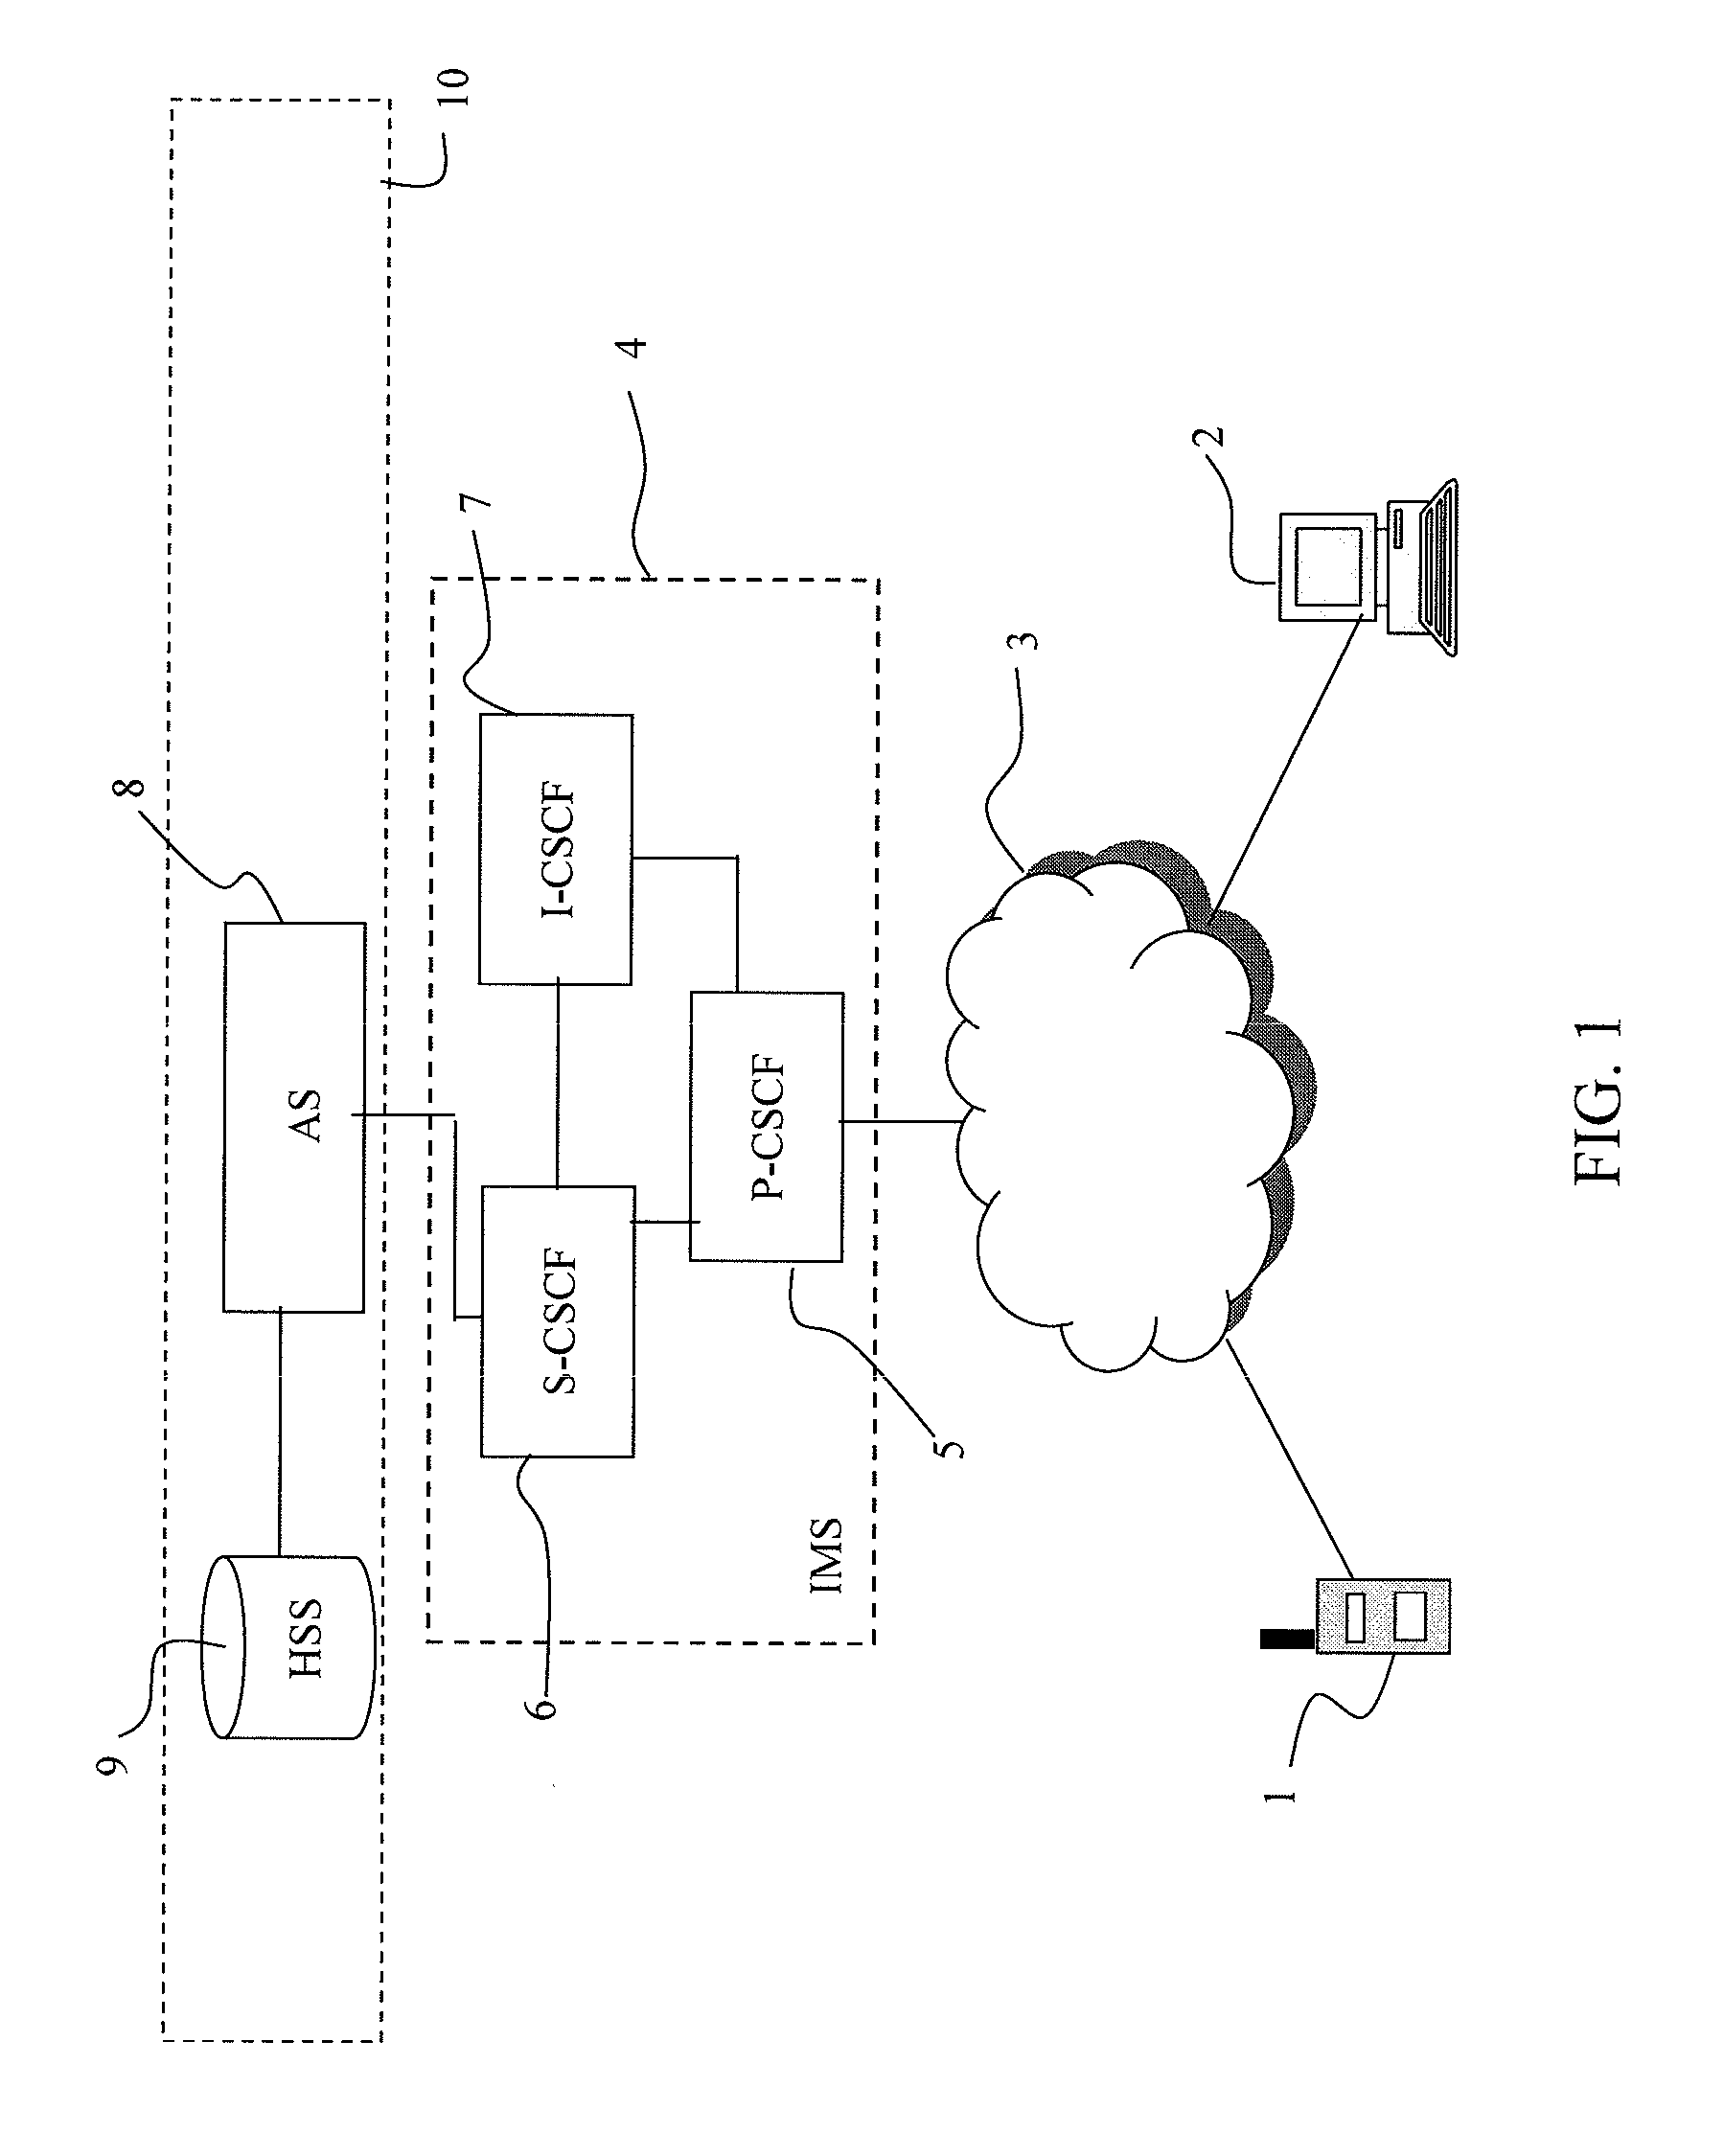 Node failure detection system and method for sip sessions in communication networks